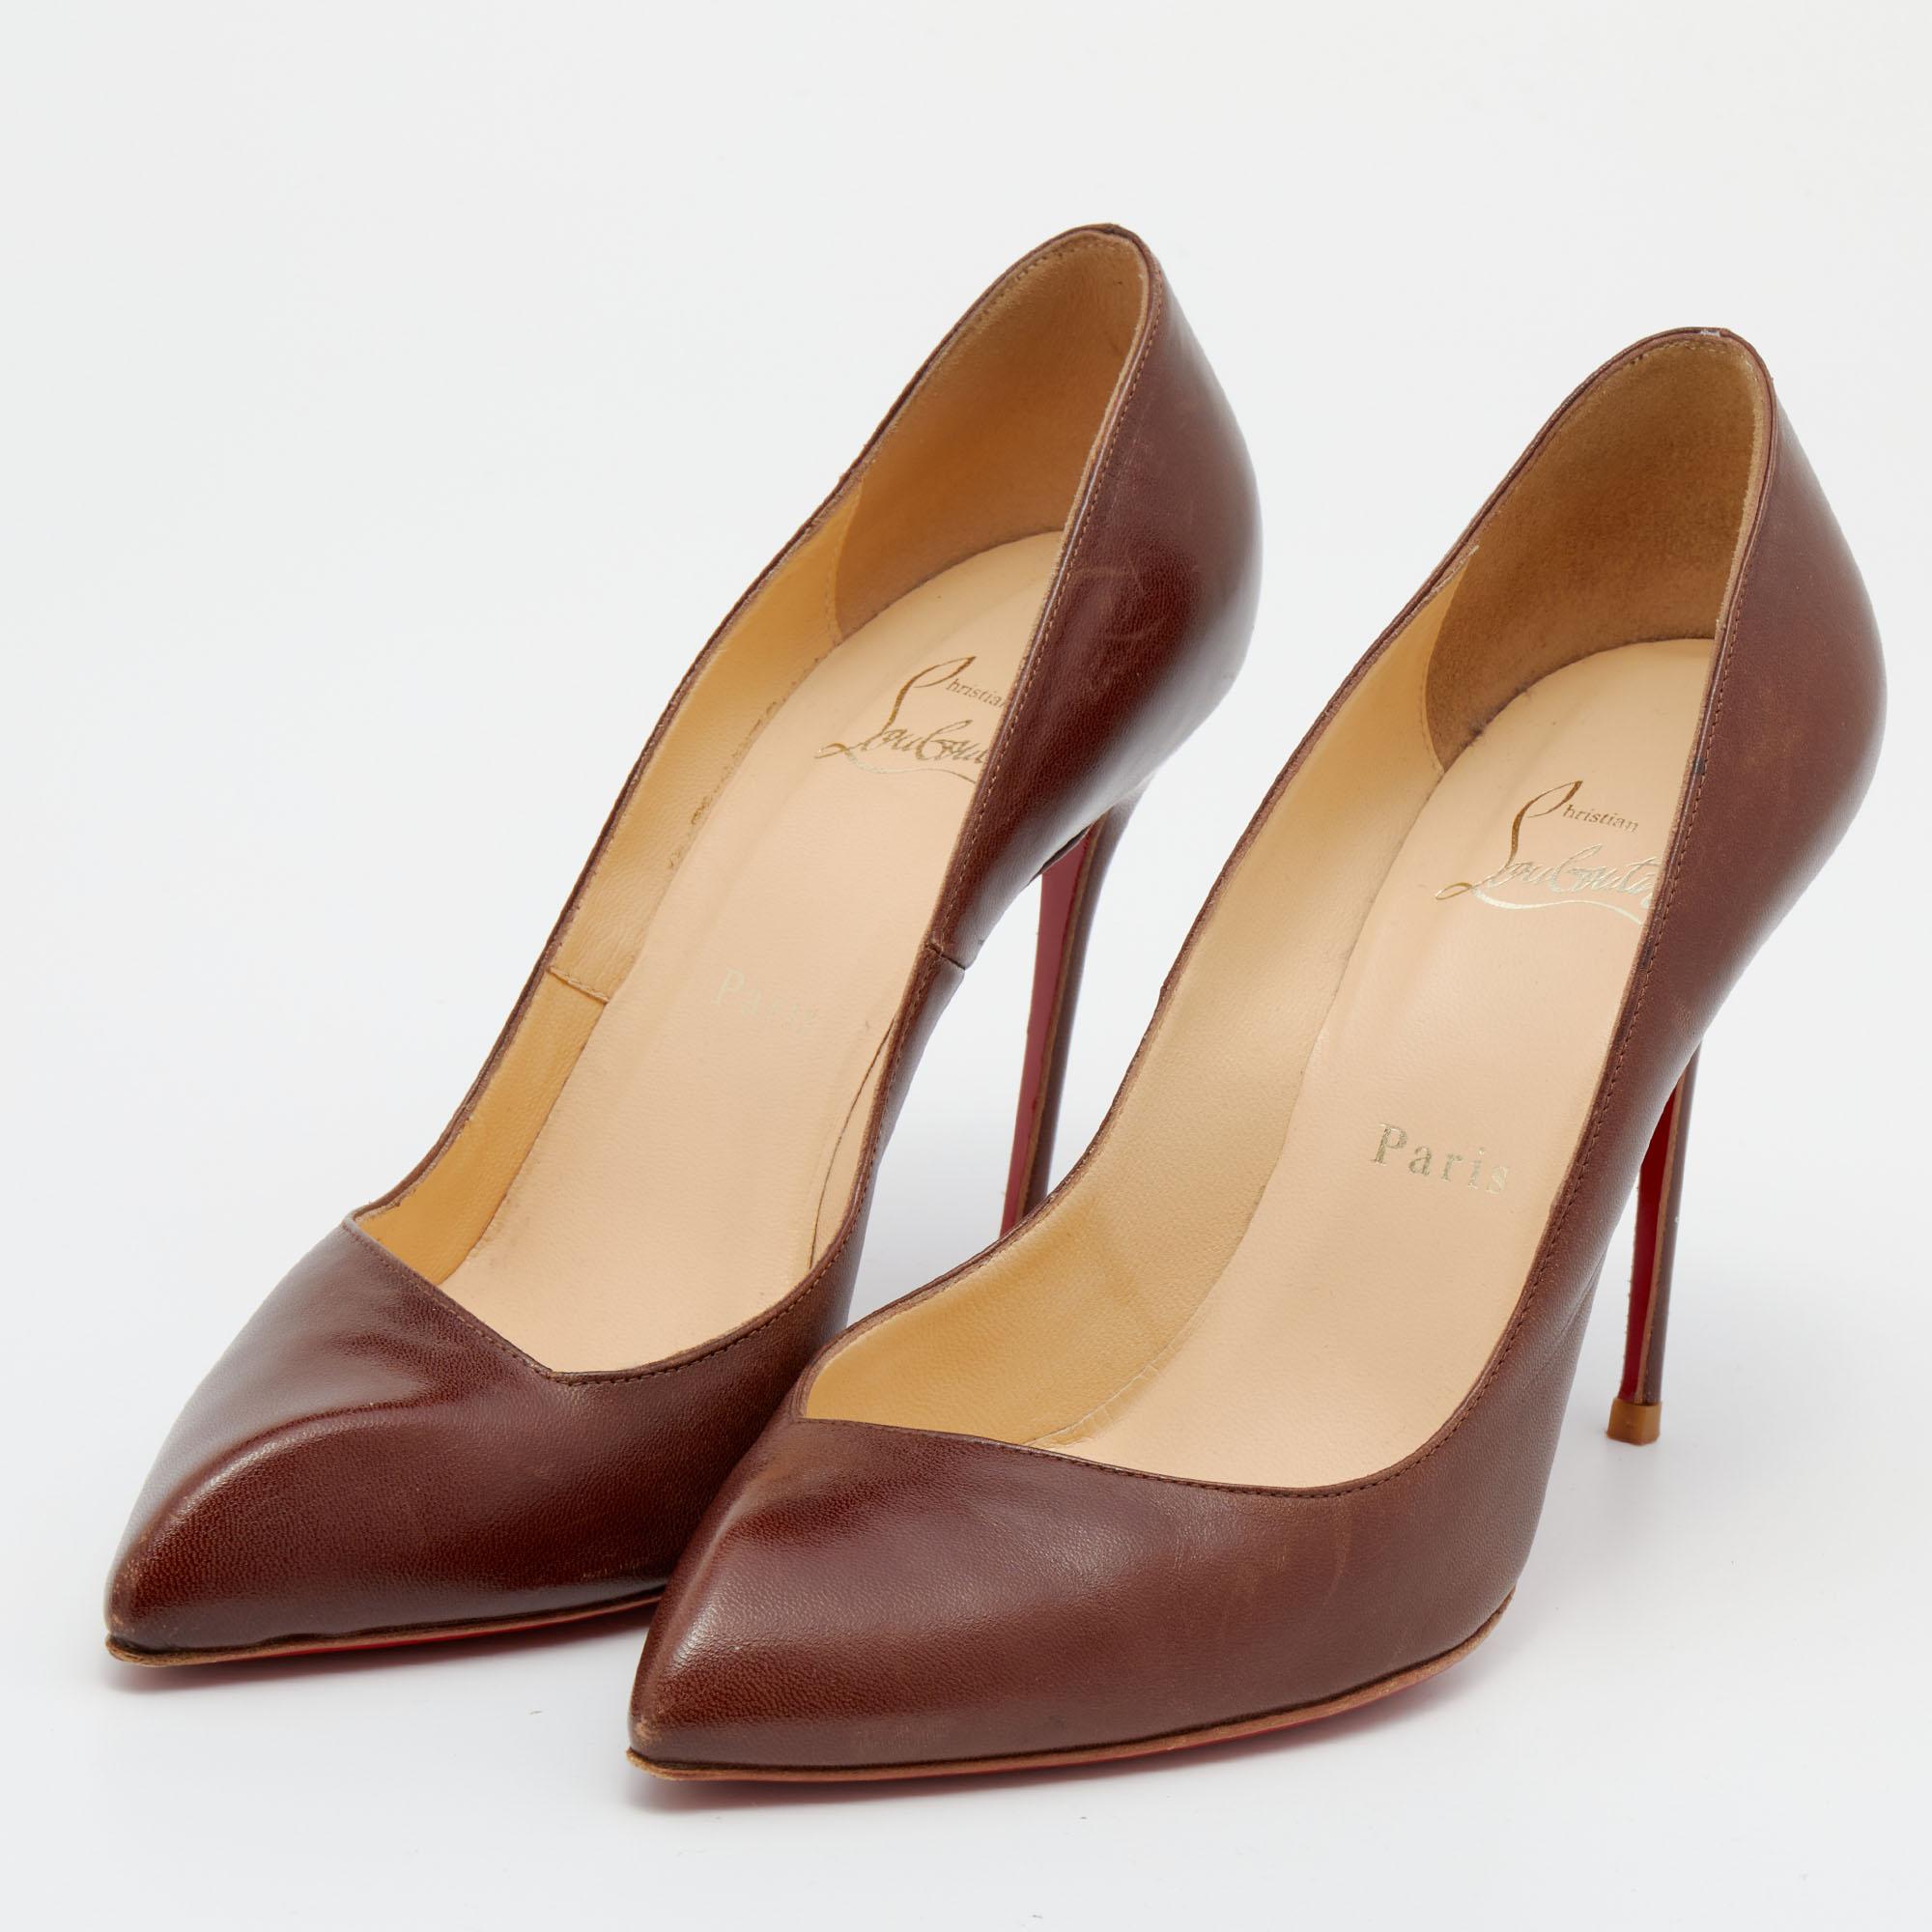 Characterized by its clean, impressive silhouette, these pumps showcase Christian Louboutin's flair in the art of shoemaking. The pair flaunts a versatile dark brown hue that will go with most of your outfits. From formal to casual and evening